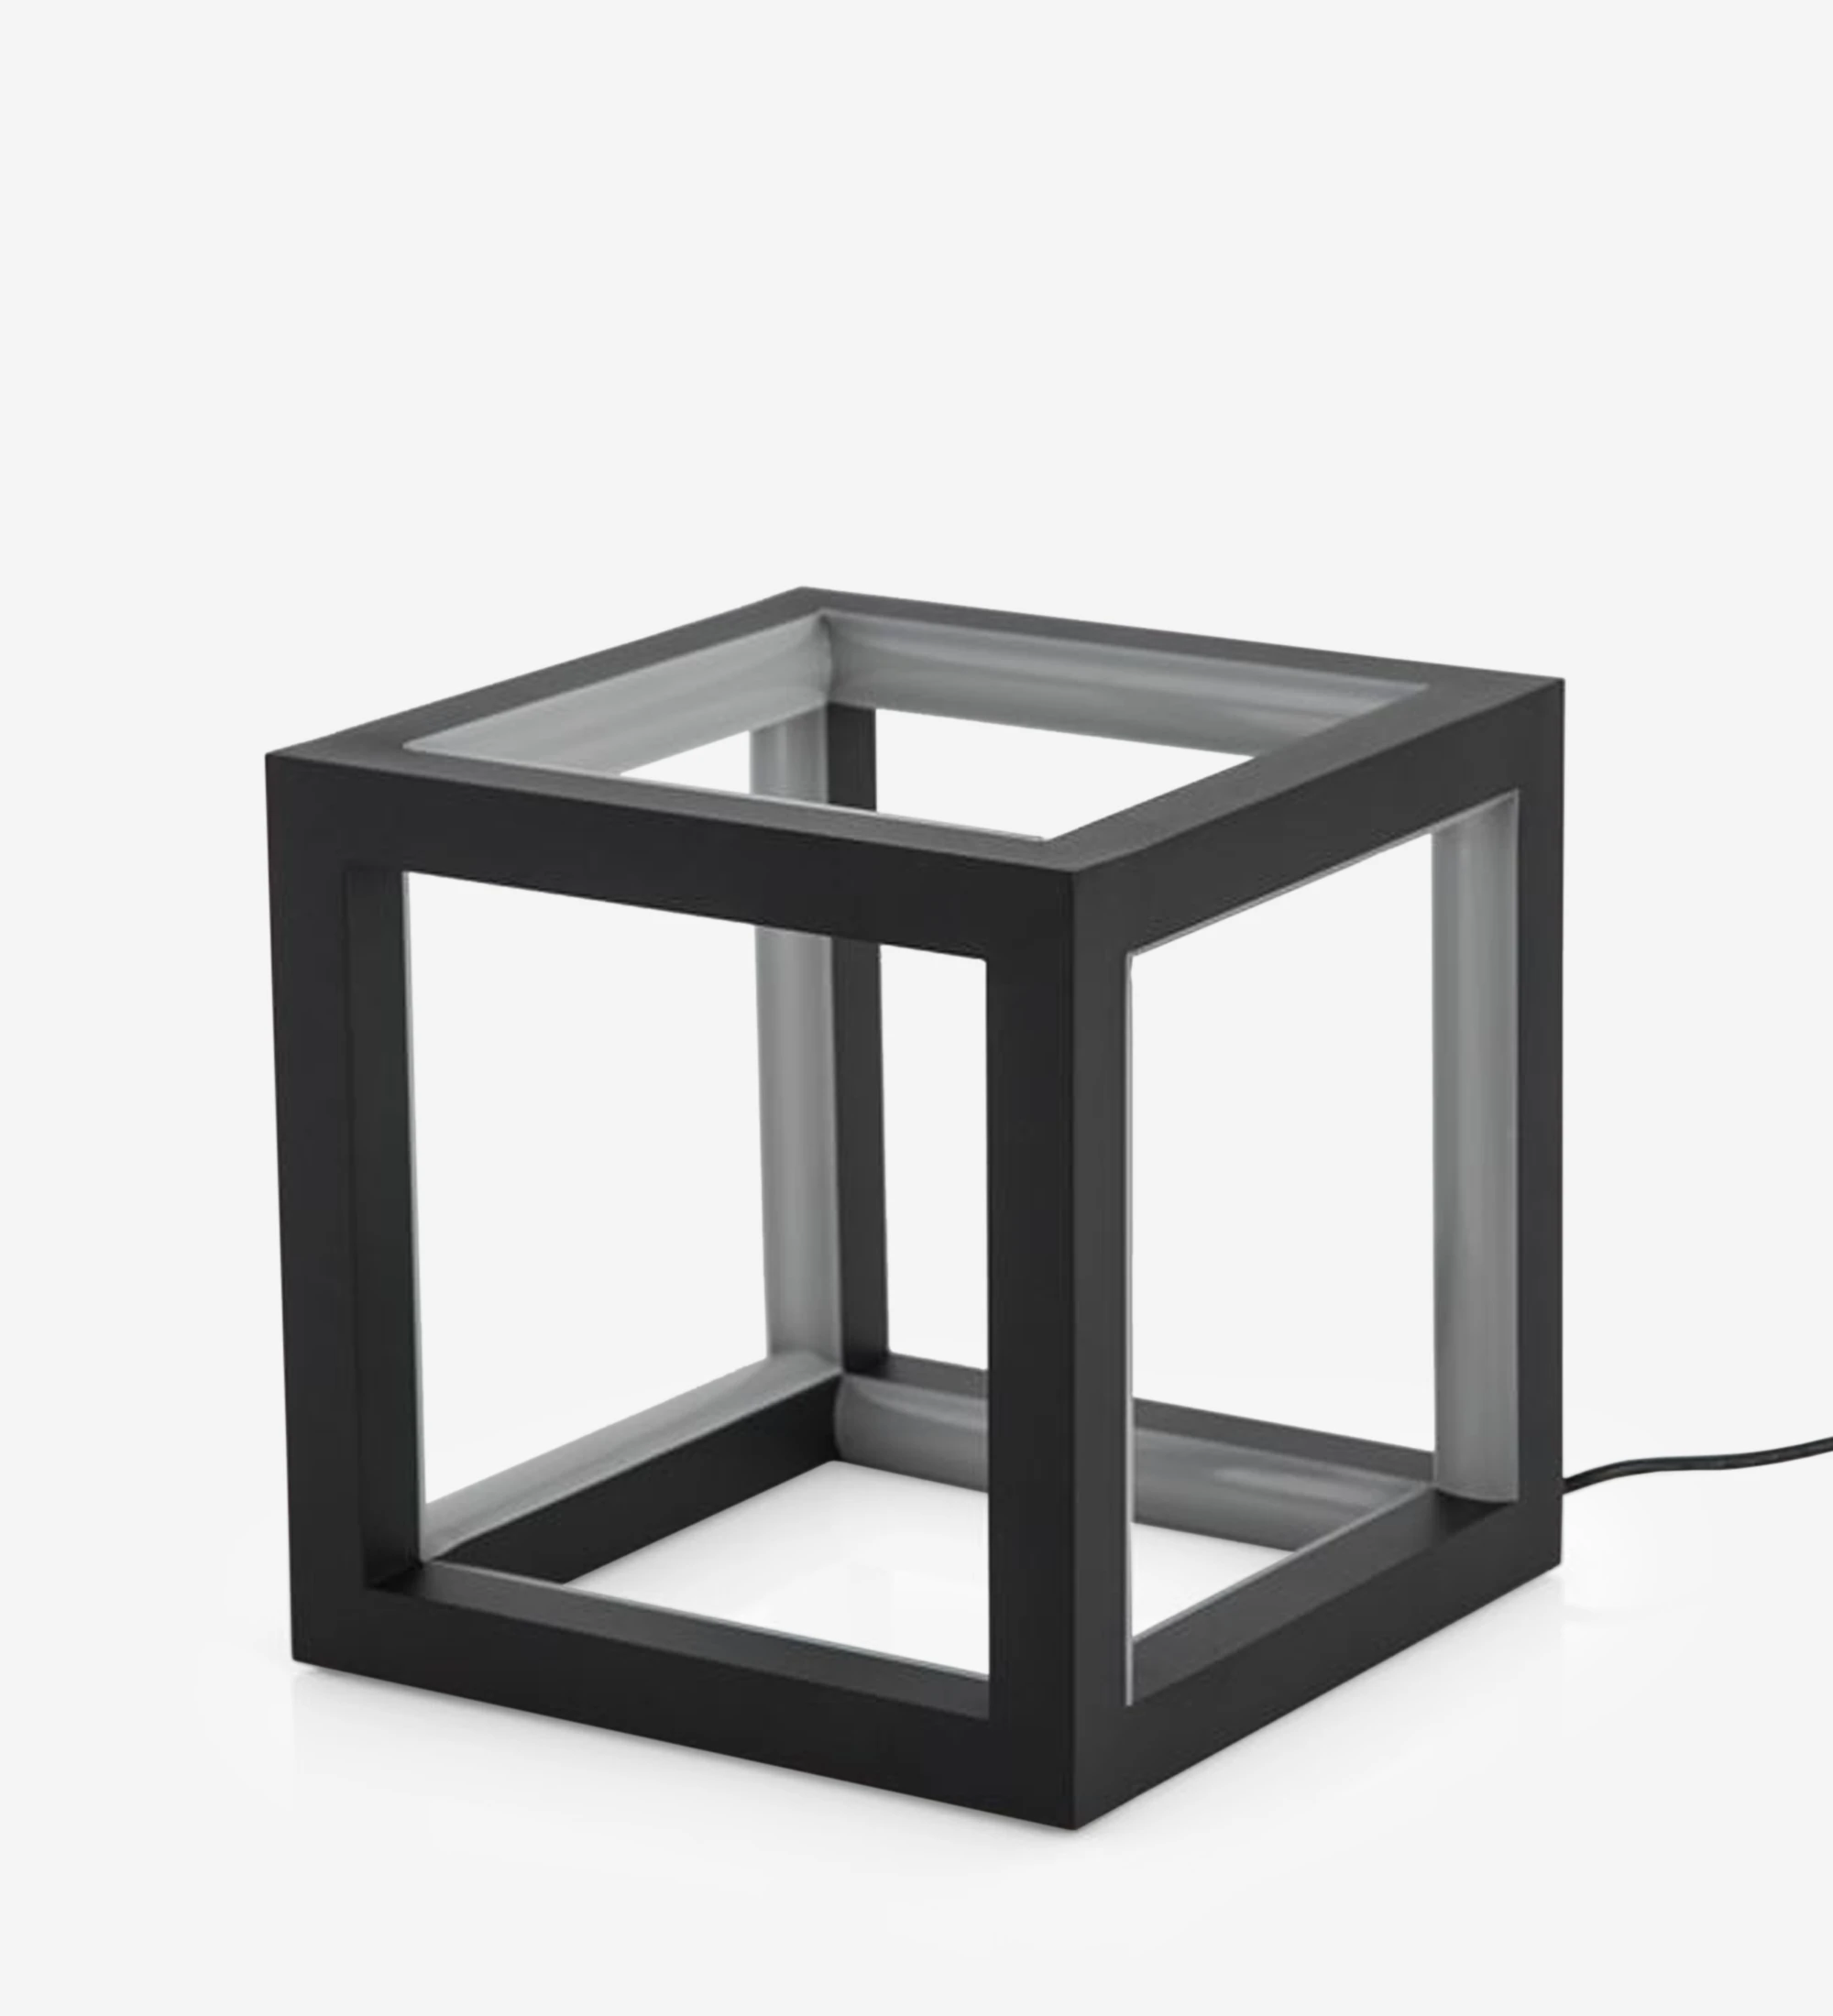 Table lamp in black aluminum and silicone.